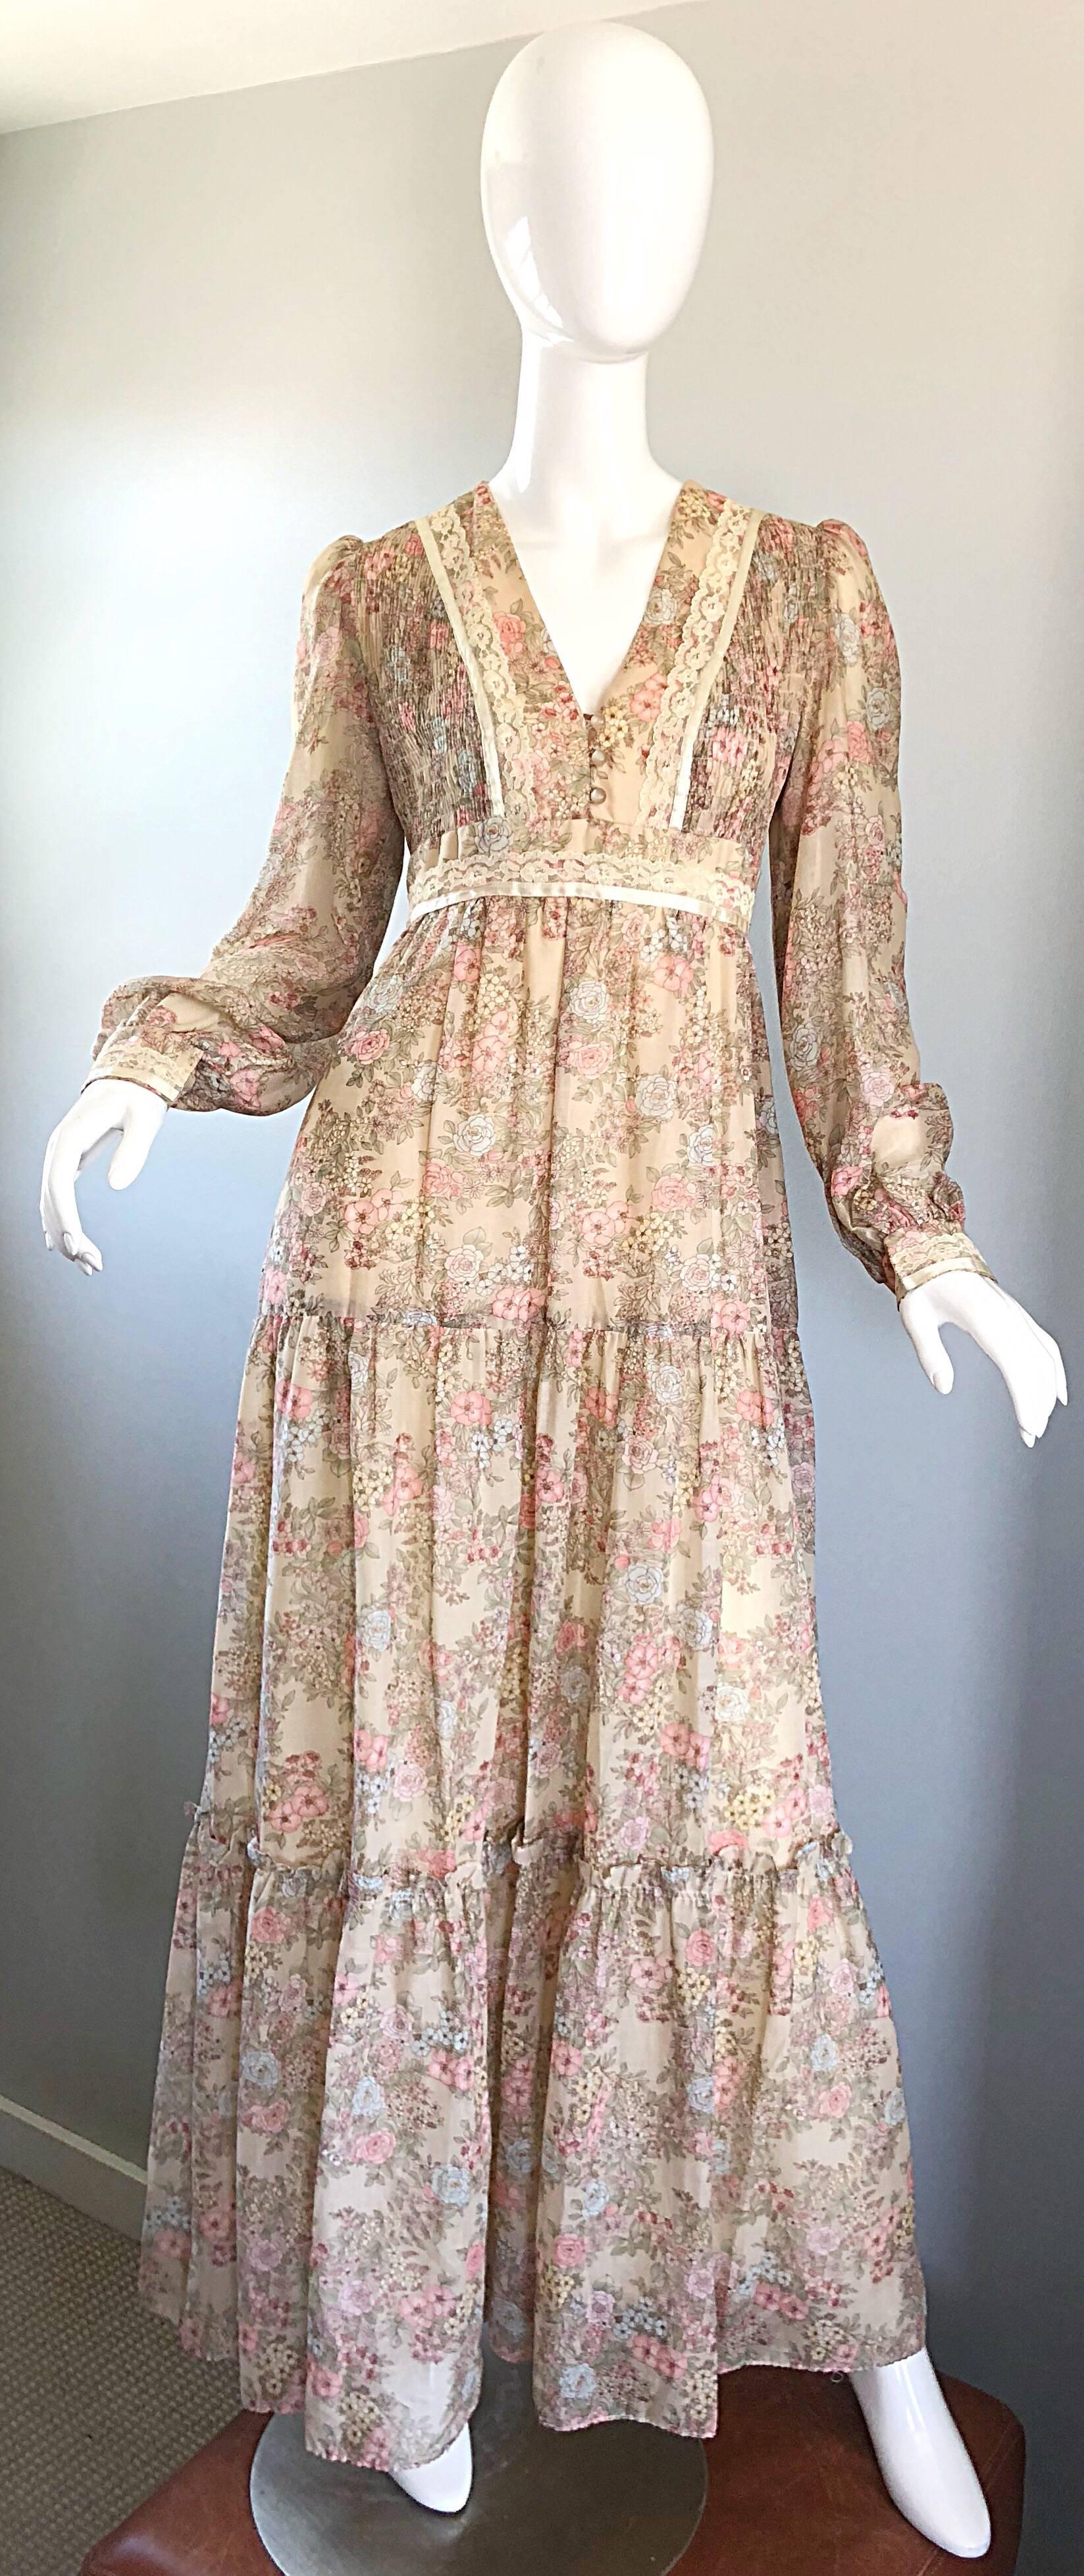 Pretty vintage 1970s lightweight cotton voile and lace flower print long sleeve maxi dress! Beige background, with light shades of pastel pink, green, yellow and blue throughout. Buttons up center bodice with lace trim along the neck, sleeve cuffs